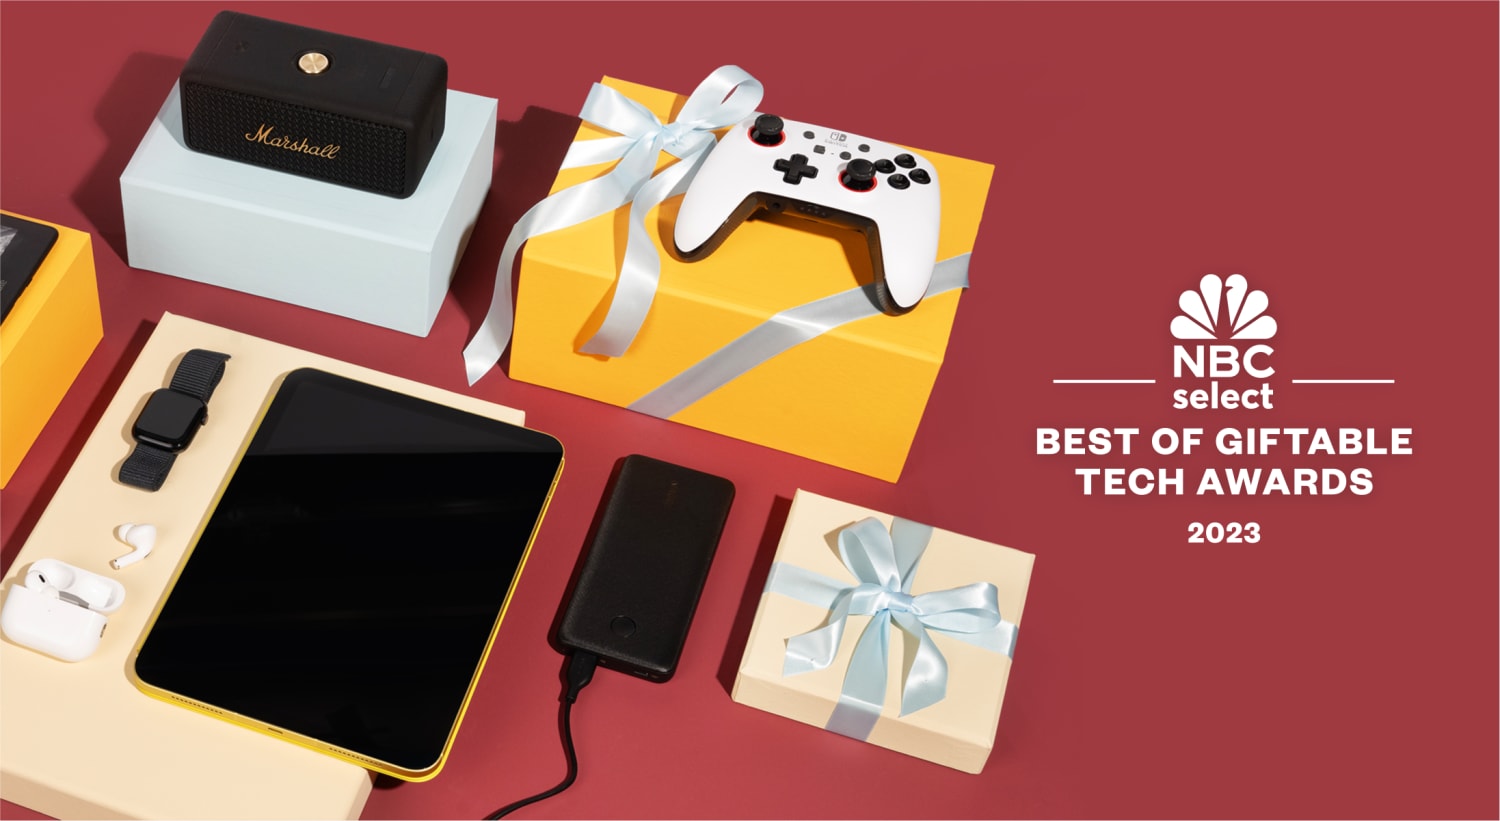 15 Cool Gaming Accessories for Gamers Who Aim to Win